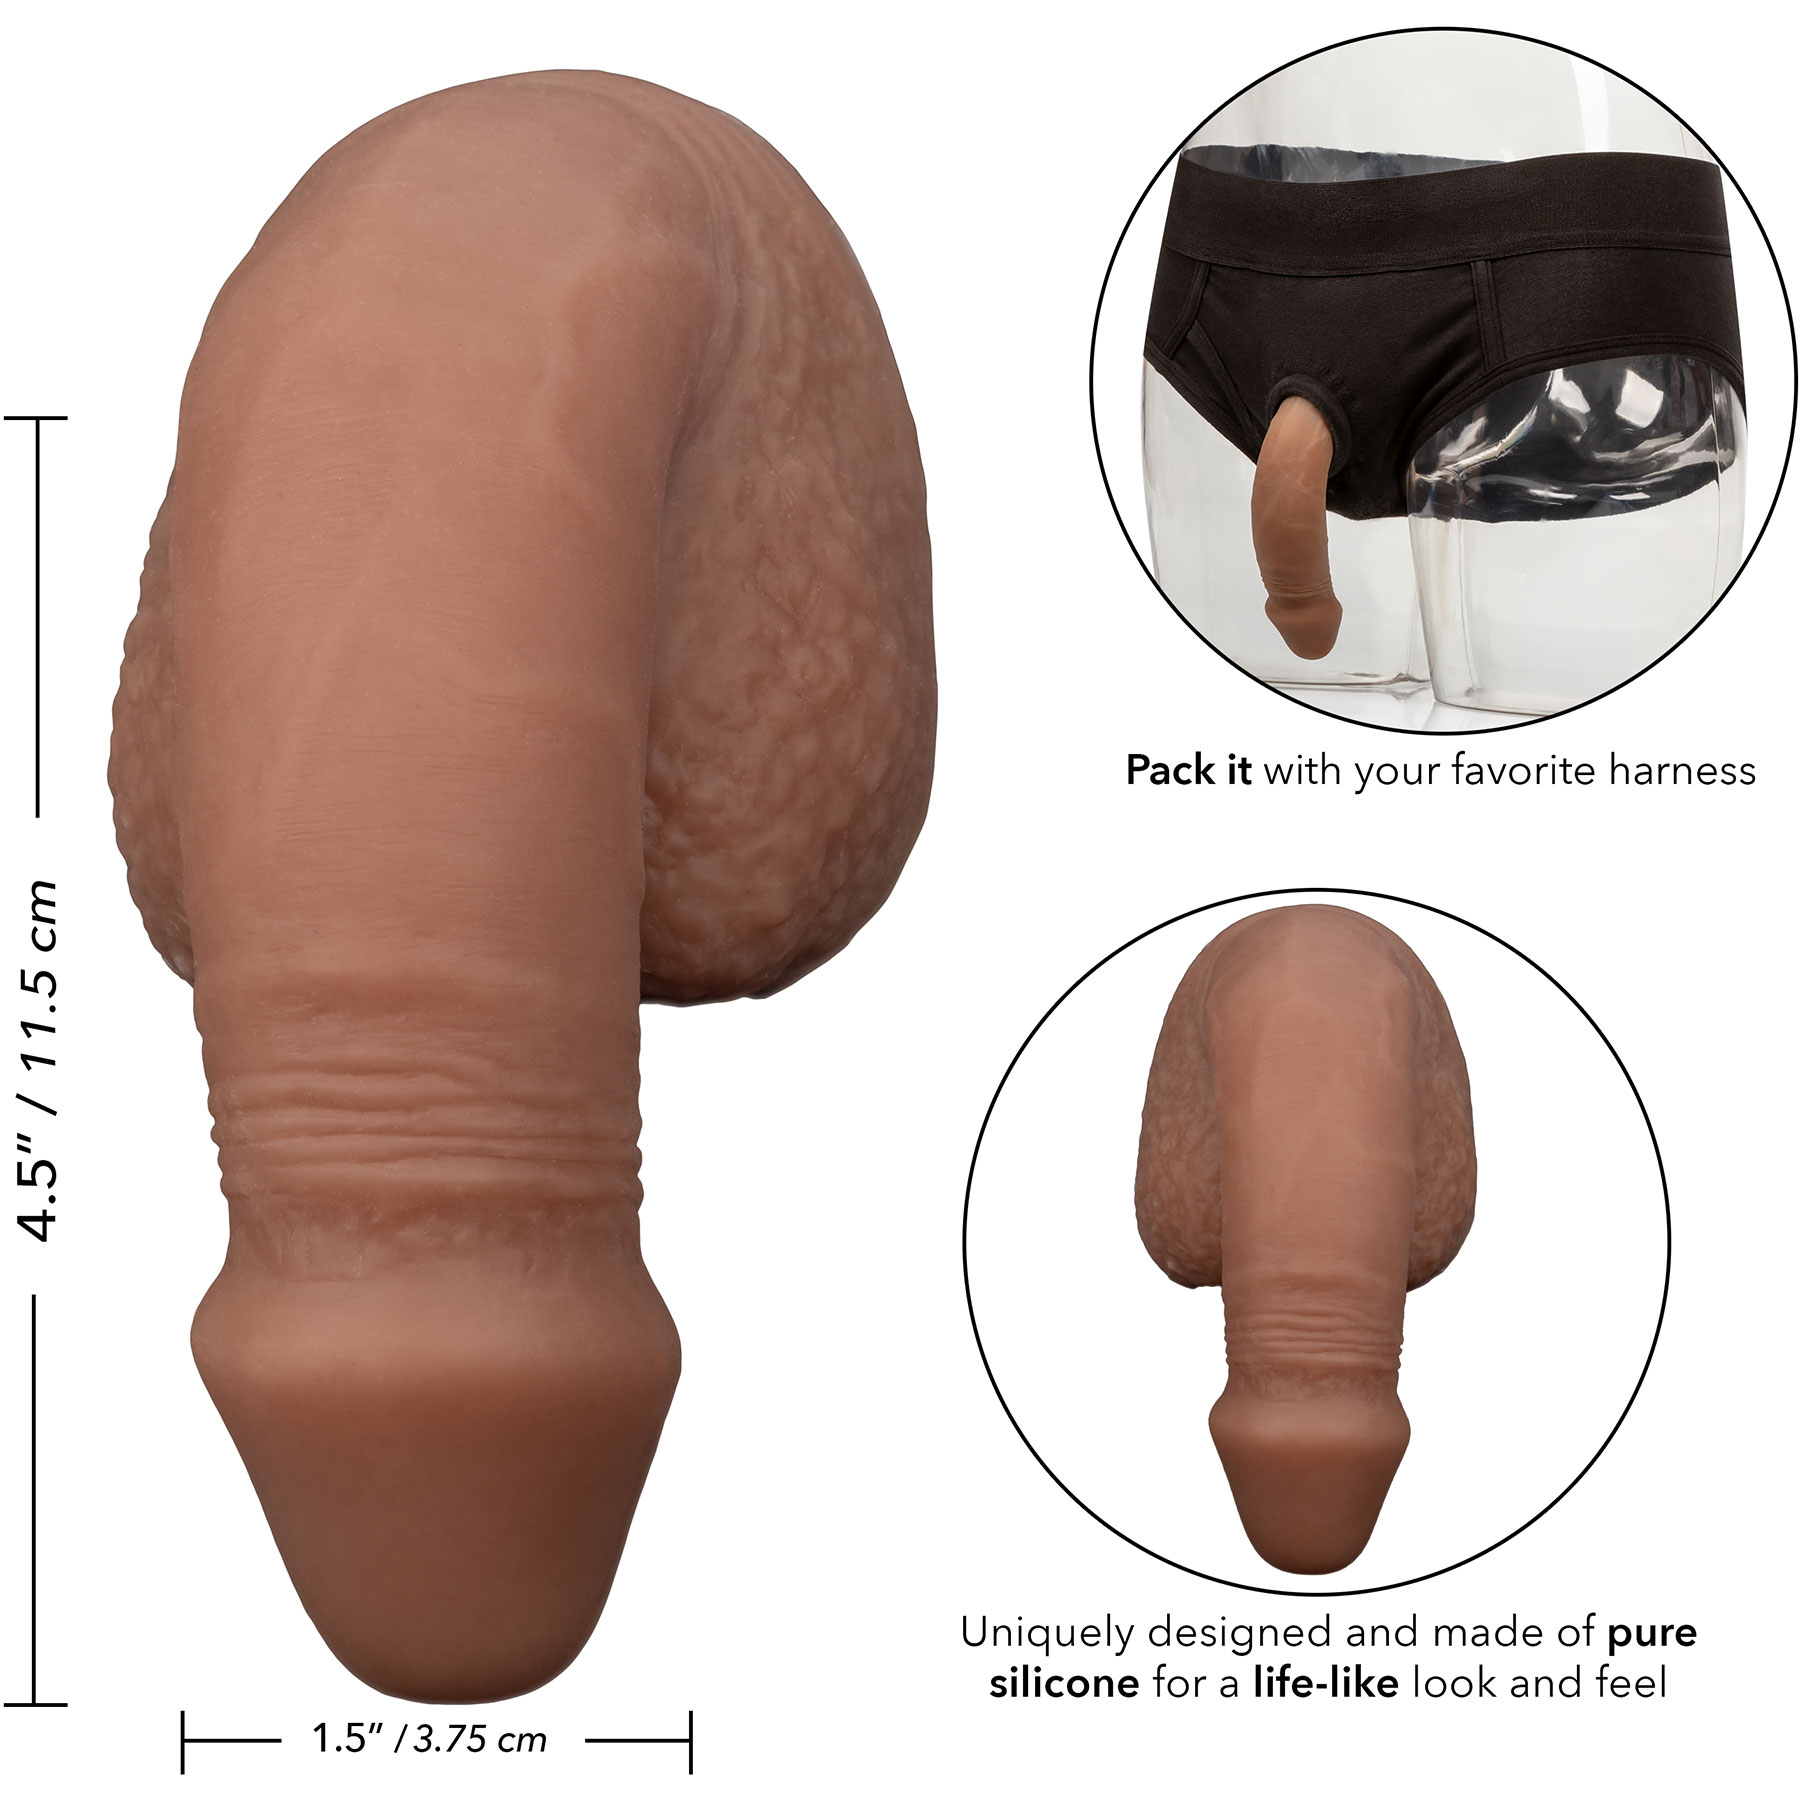 Packer Gear Silicone Packing Penis 5